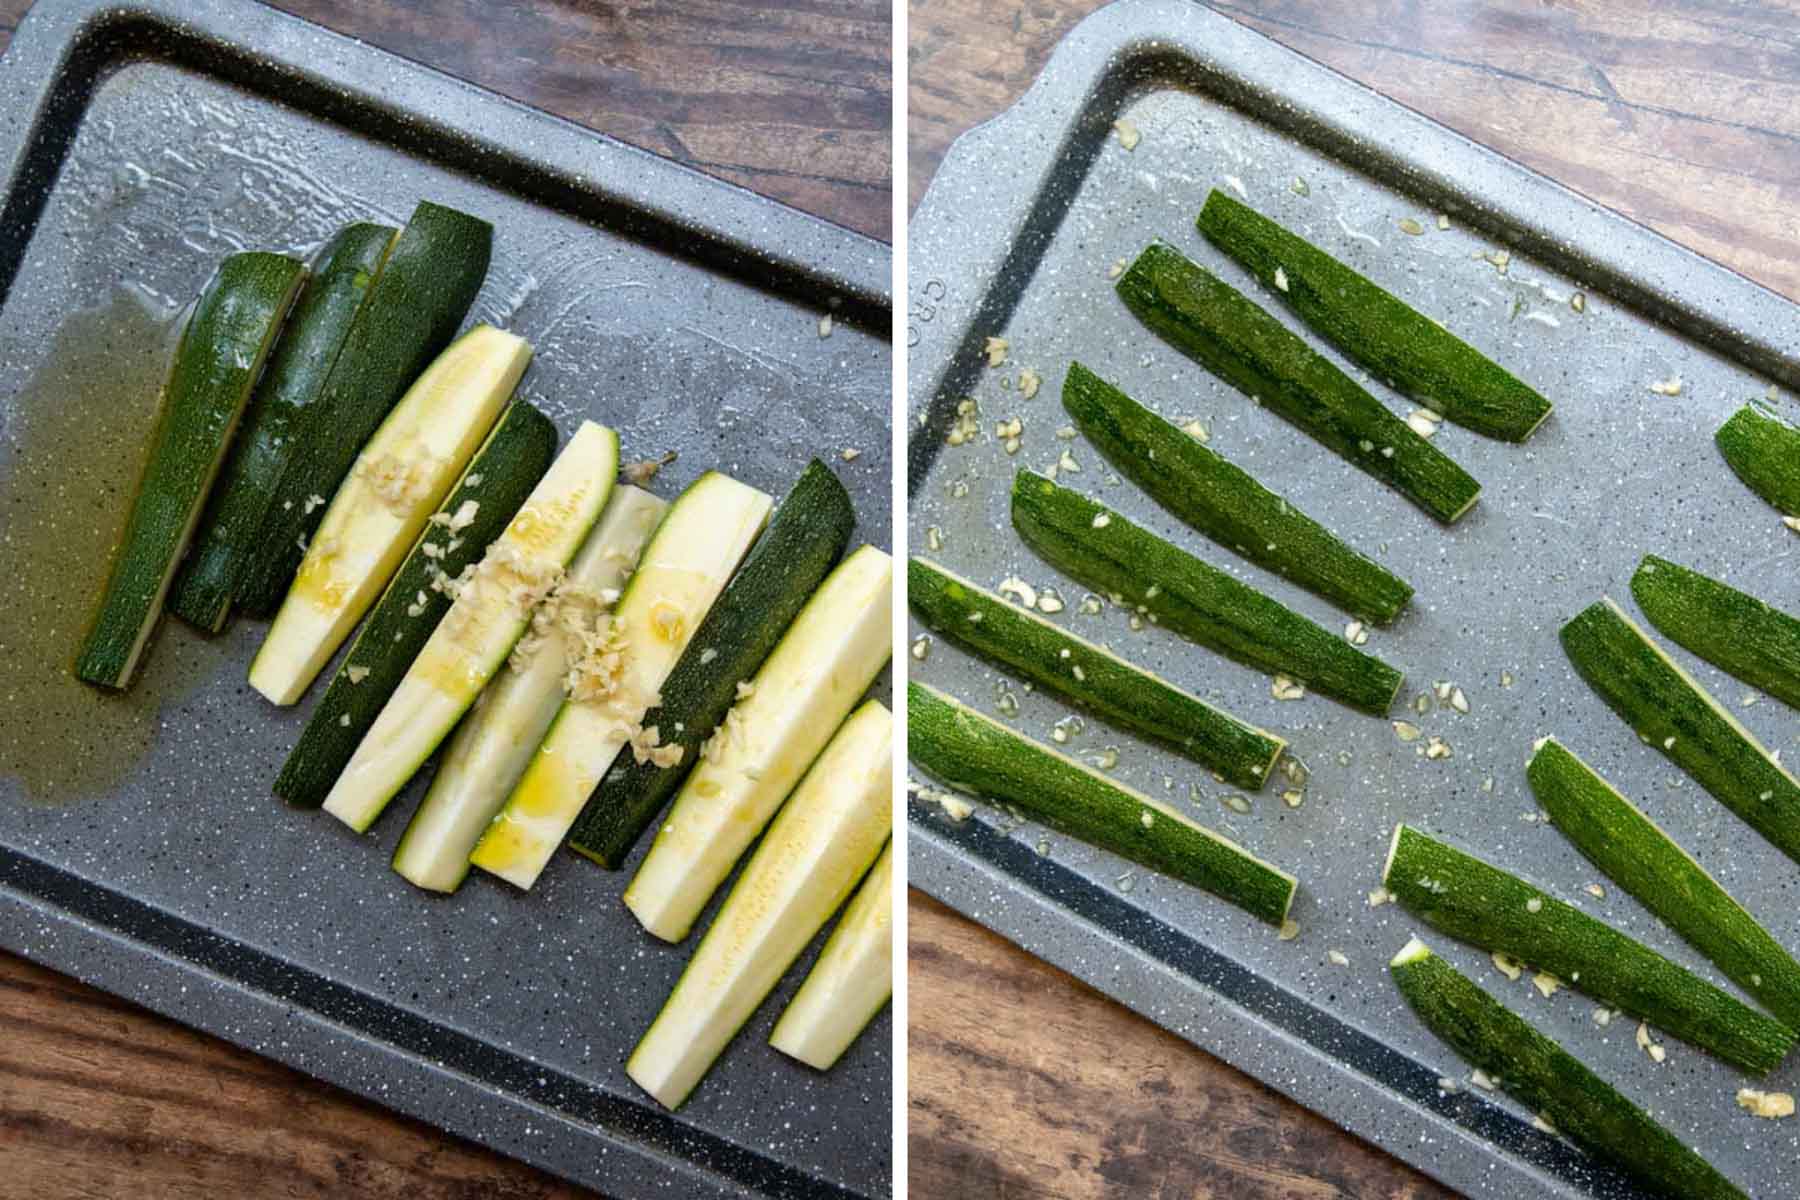 images showing how to roast zucchini.